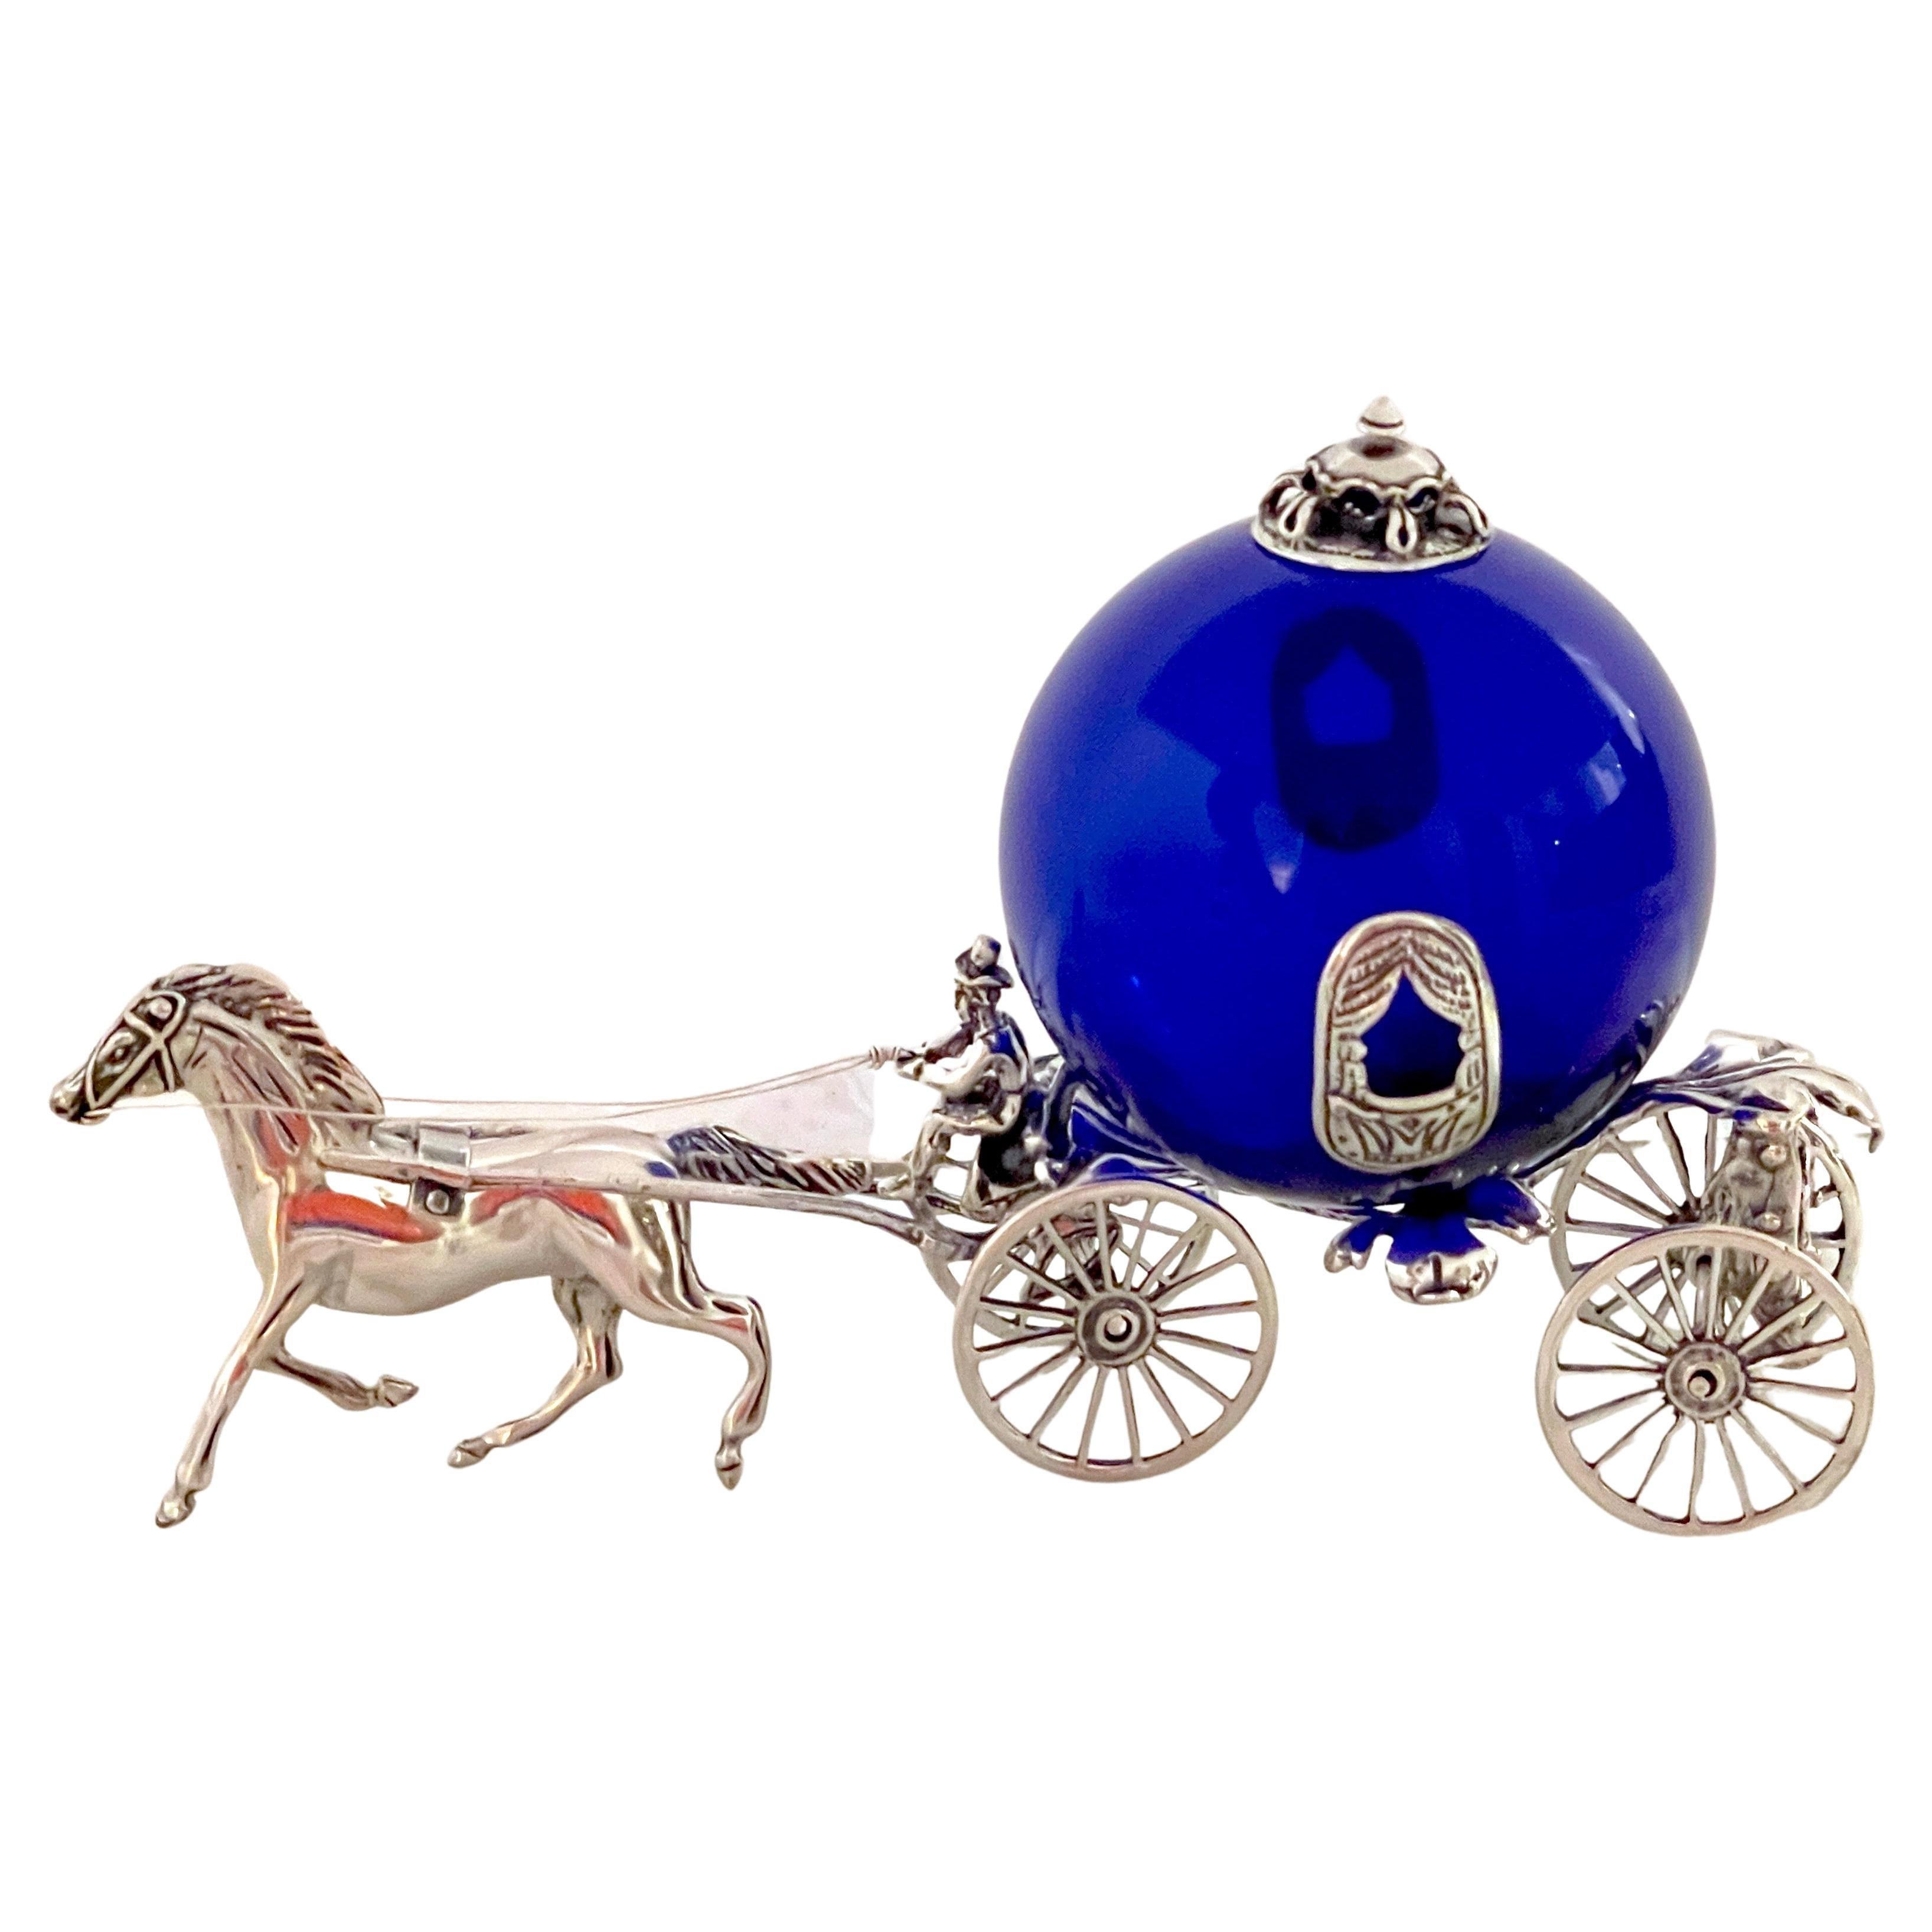 Italian Sterling and Cobalt Murano Glass Fantasy Model of a Horse & Carriage